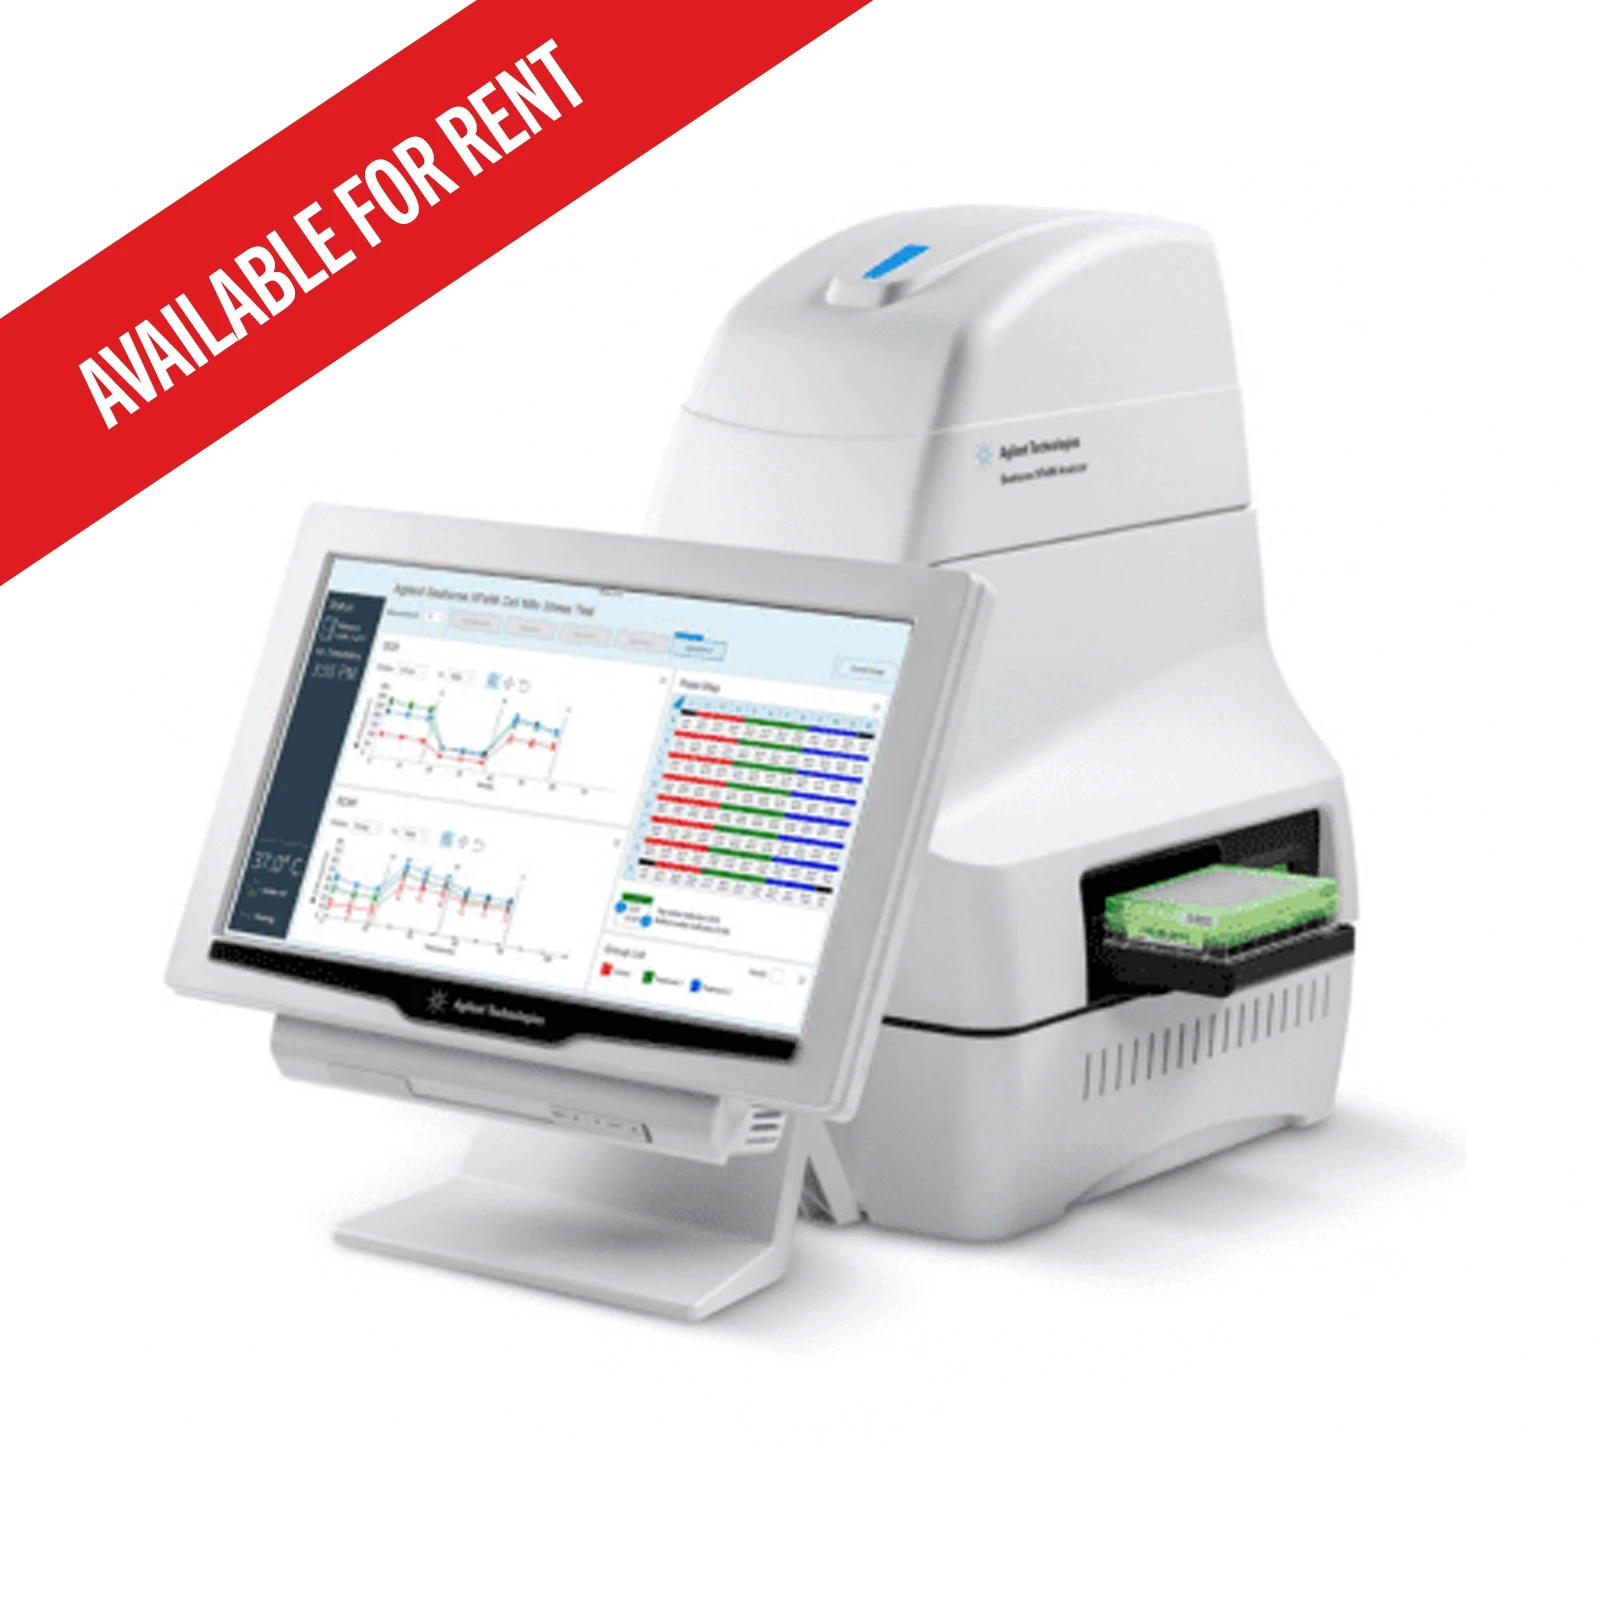 Agilent Certified Pre-Owned Seahorse XFe96 Analyzer